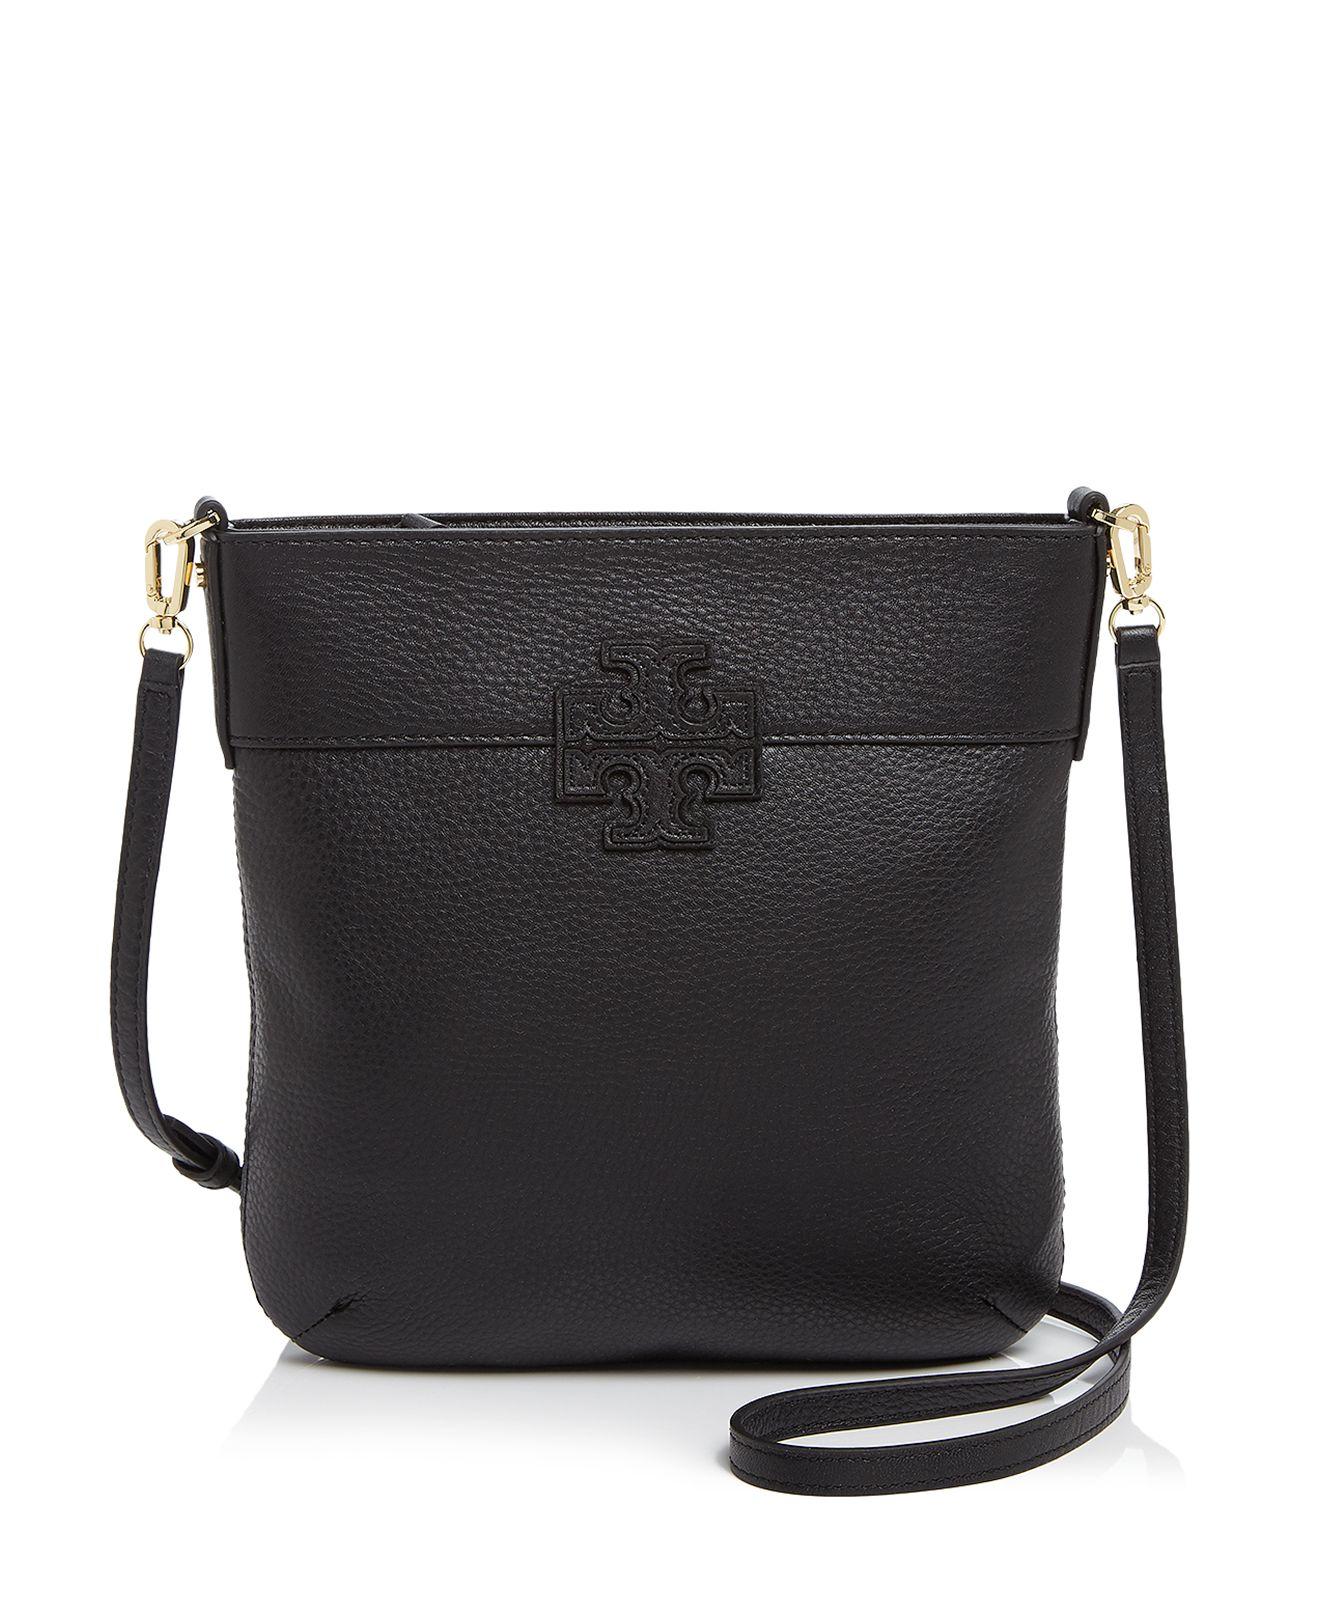 Lyst - Tory Burch Stacked T Crossbody in Black